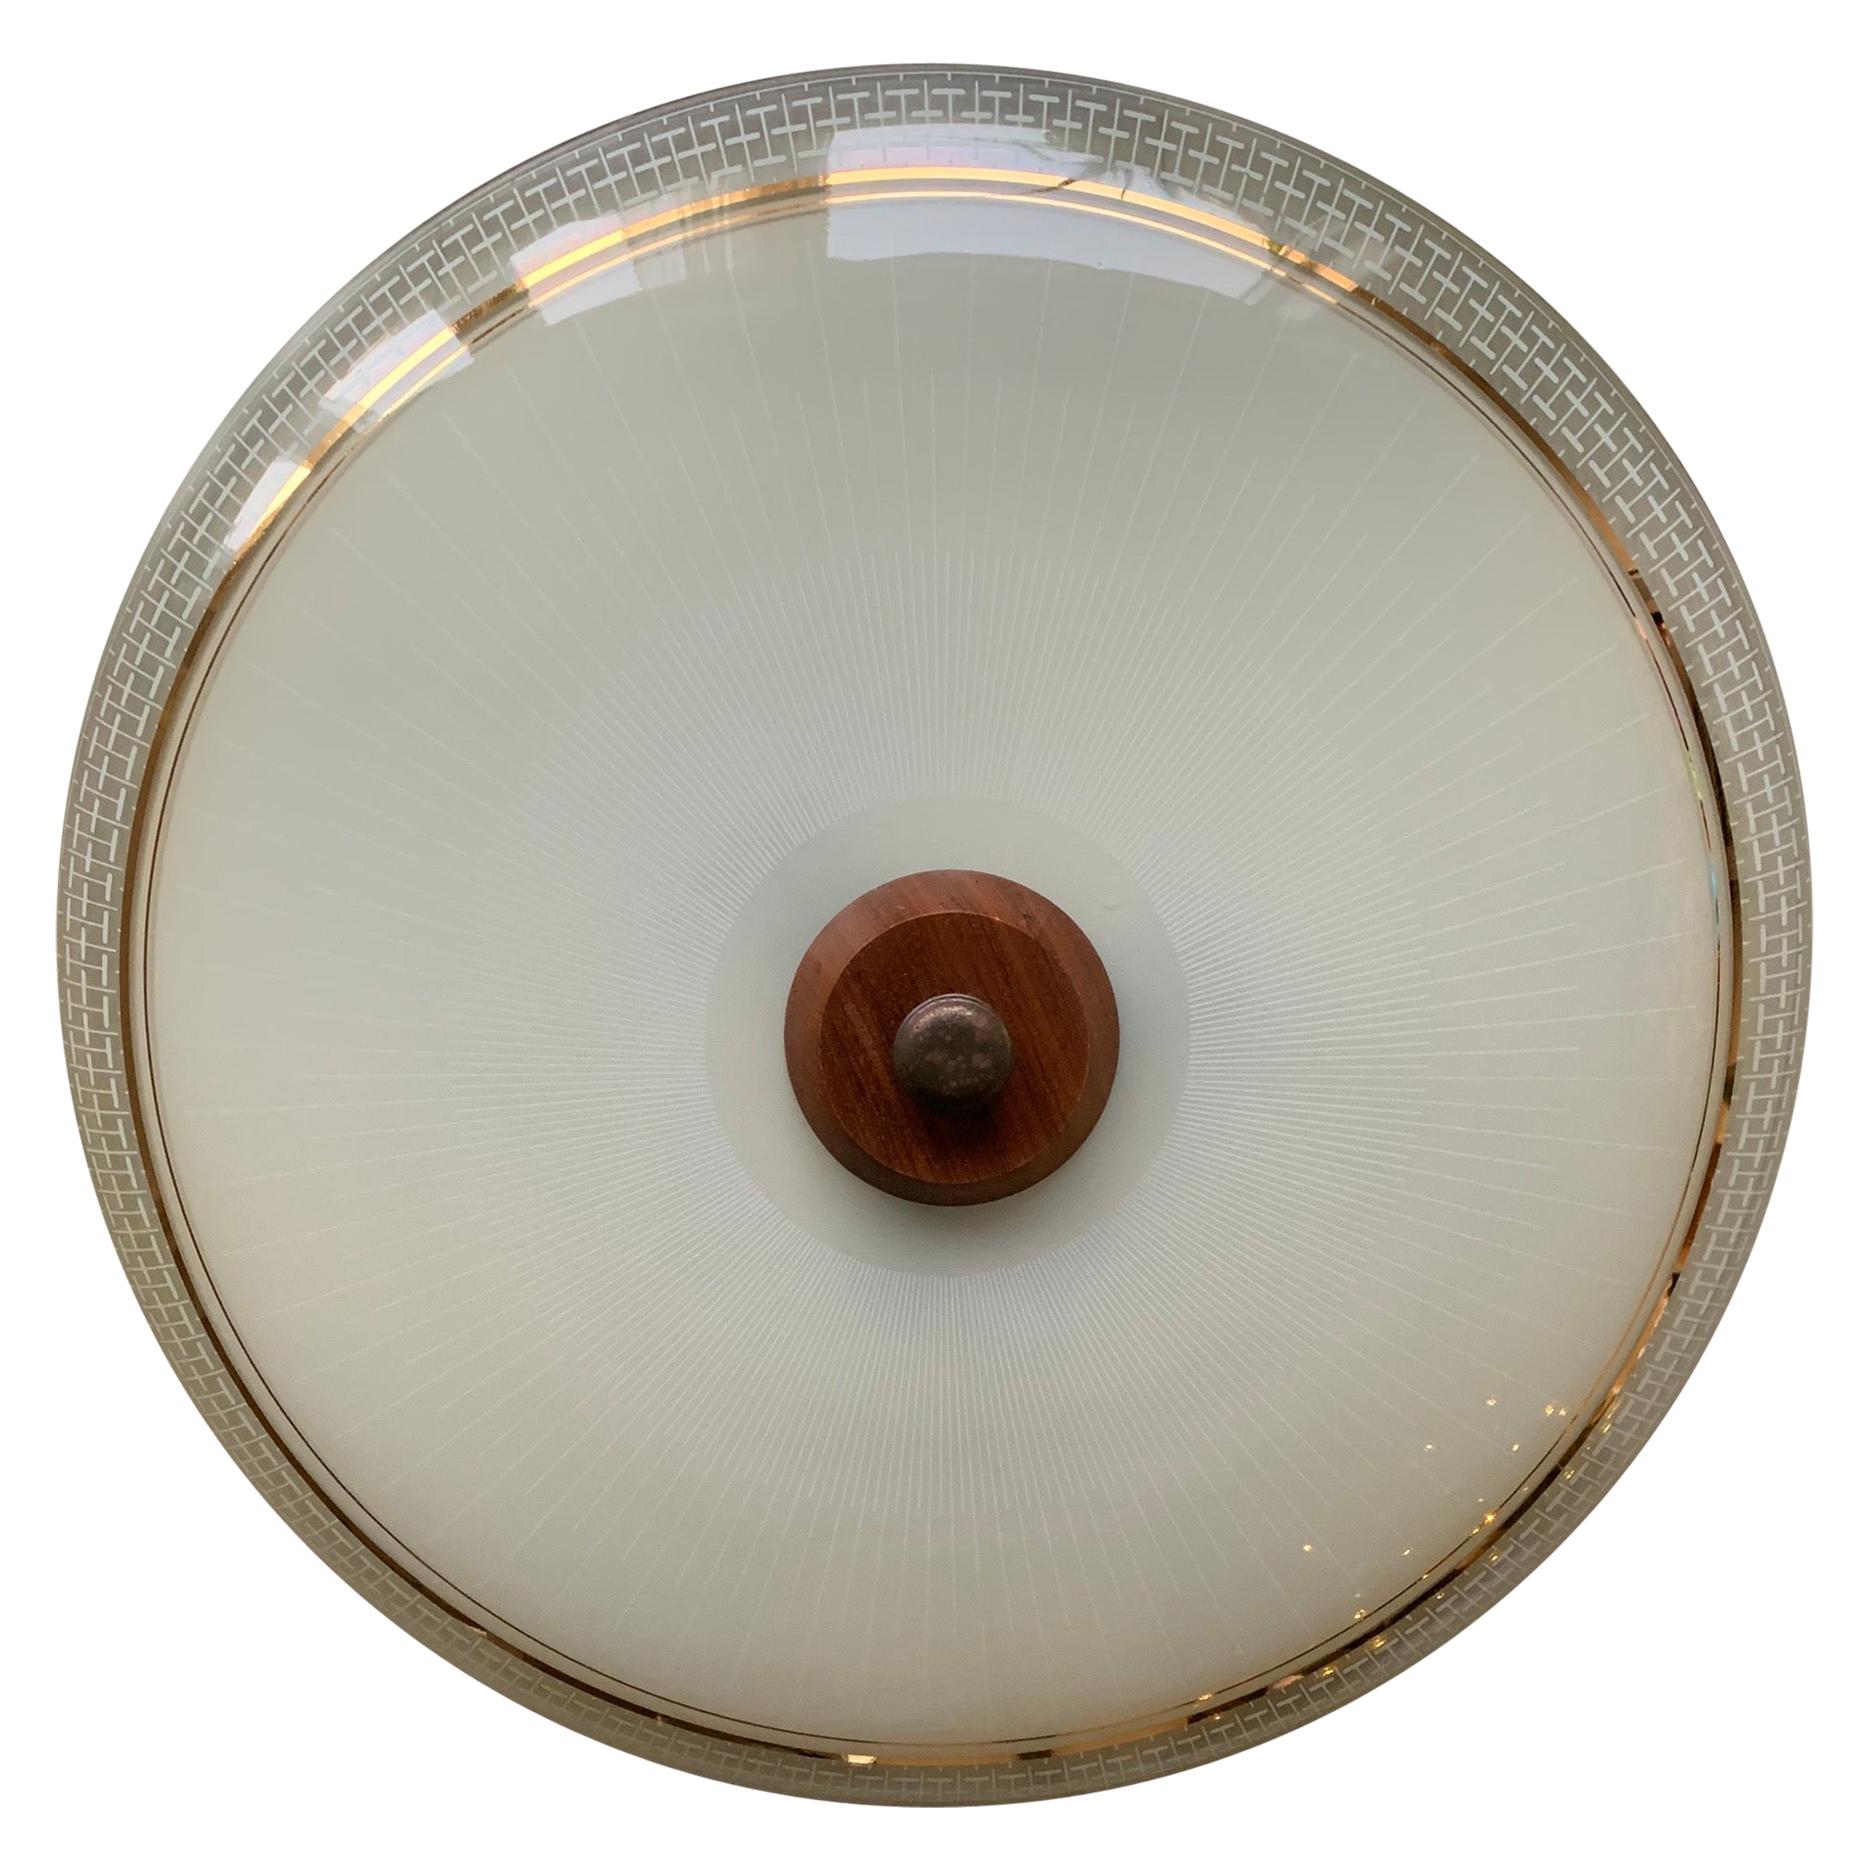 Beautifully decorated and colorful light fixture from the European midcentury era.

This Mid-Century Modern work of (lighting) art is another one of our recent, wonderful finds. As you can see, the sleek and slightly curved, glass shade comes with a